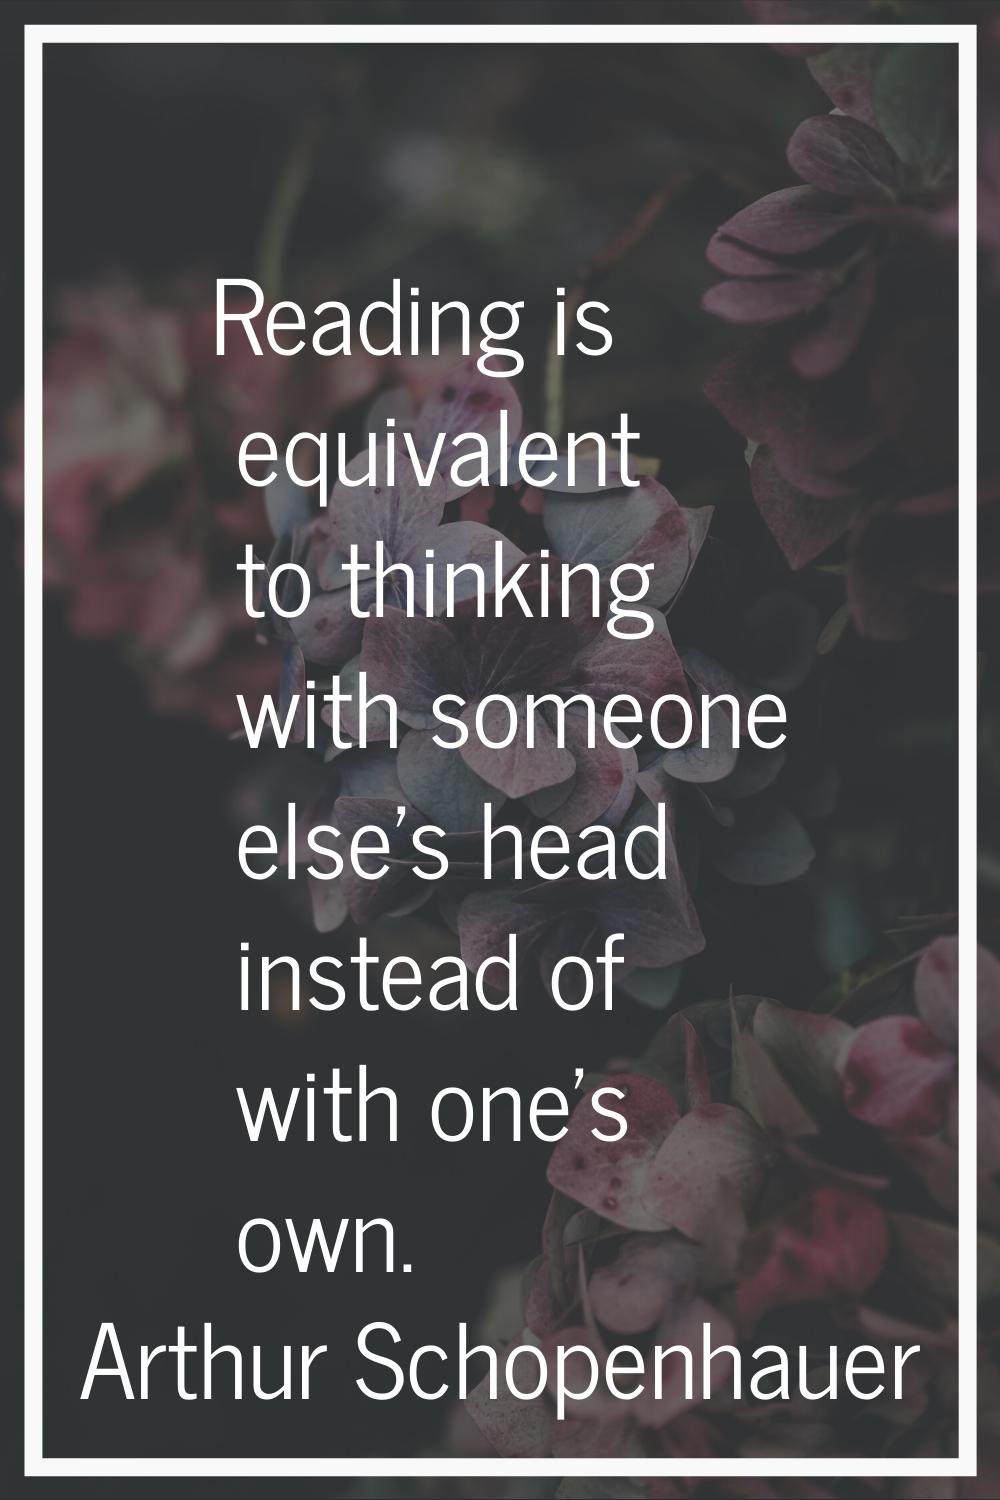 Reading is equivalent to thinking with someone else's head instead of with one's own.